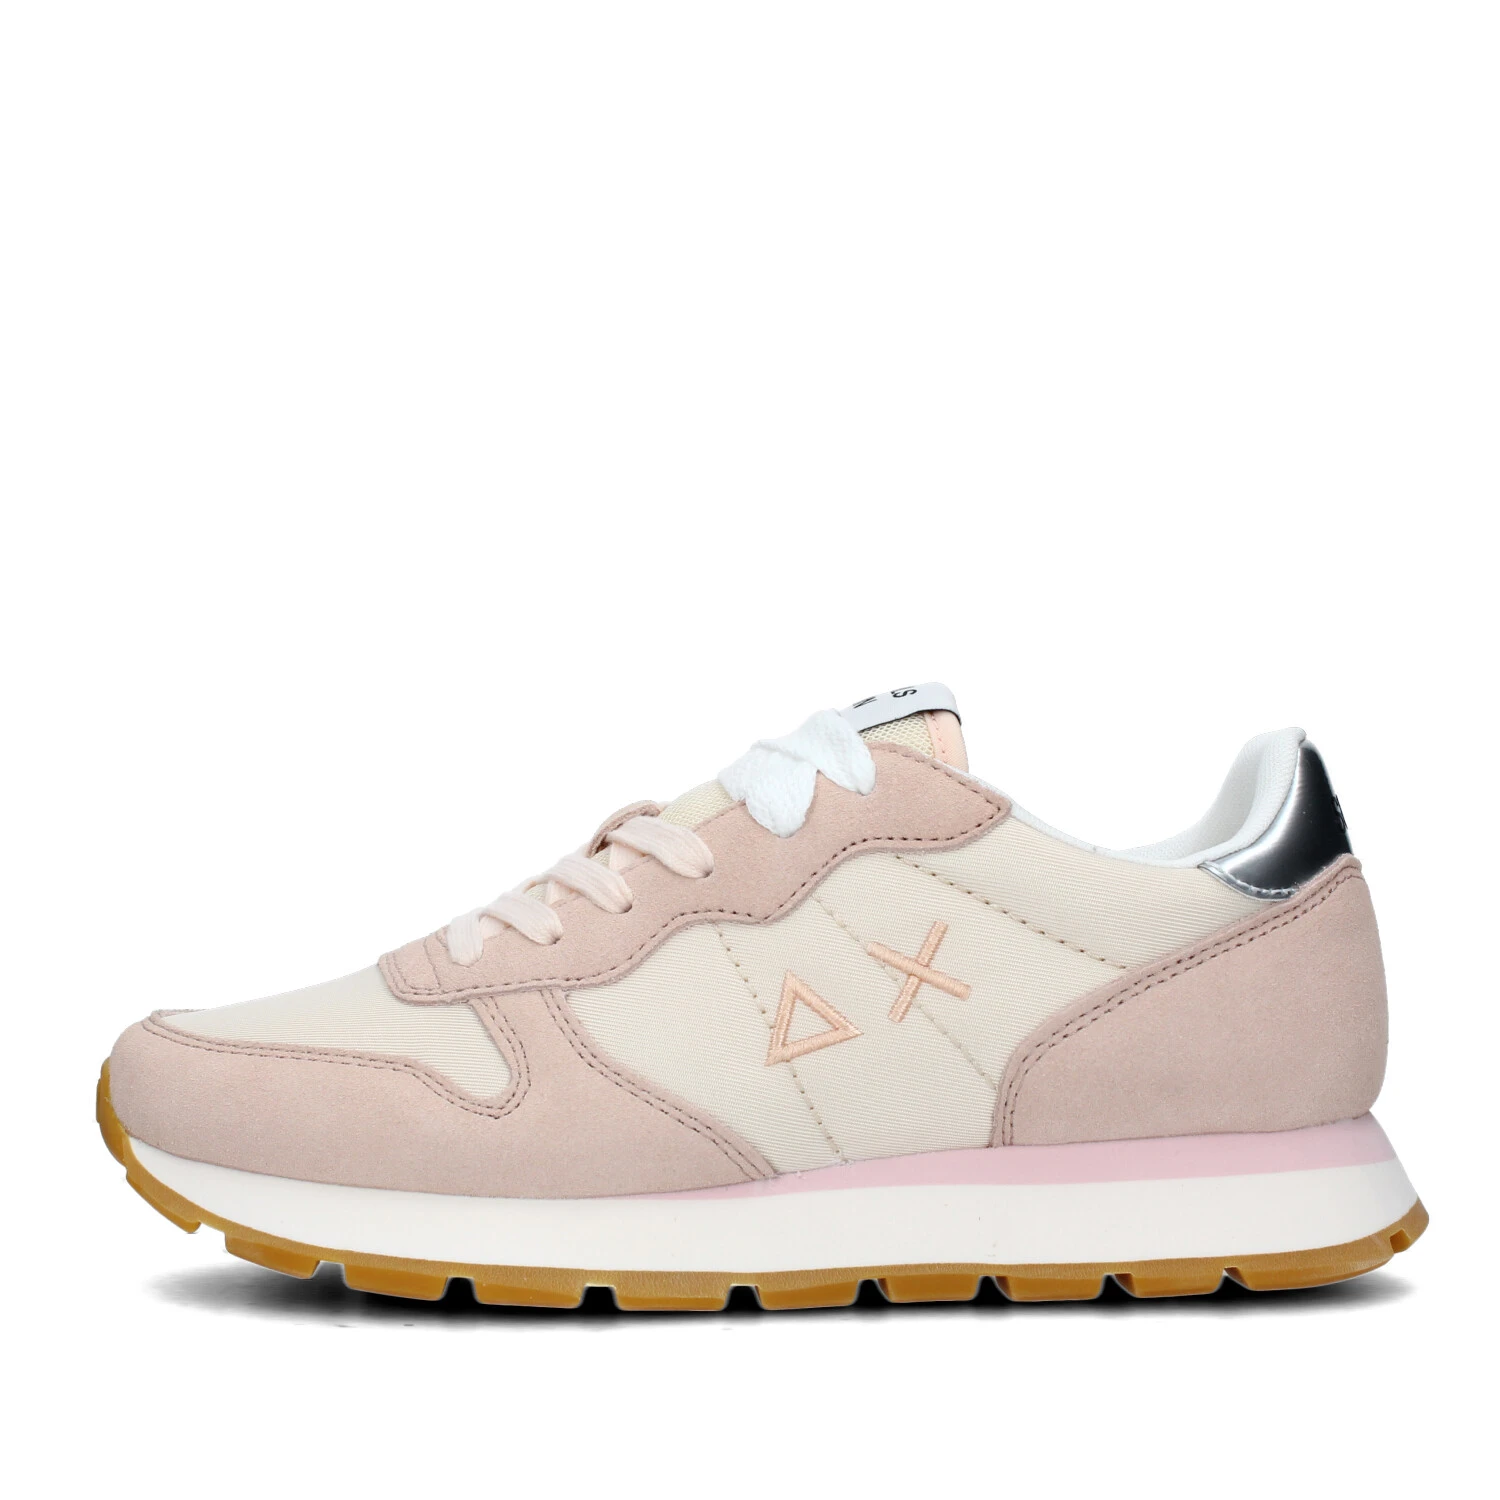 SNEAKERS BASSE ALLY GOLD SILVER DONNA BEIGE